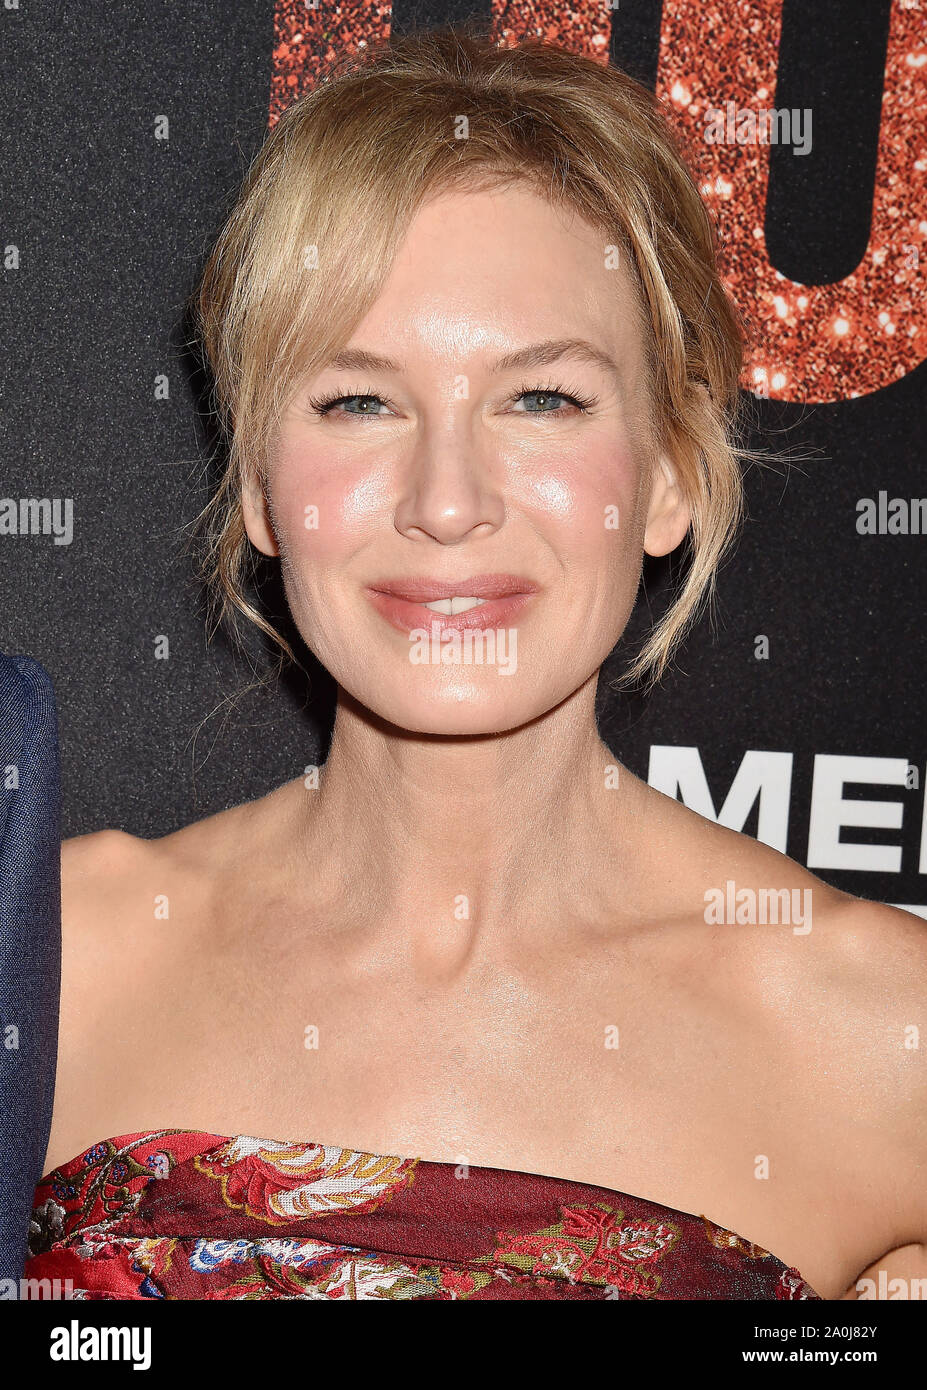 BEVERLY HILLS, CA - SEPTEMBER 19: Renee Zellweger attends the LA premiere of Roadside Attraction's 'Judy' at Samuel Goldwyn Theater on September 19, 2019 in Beverly Hills, California. Stock Photo